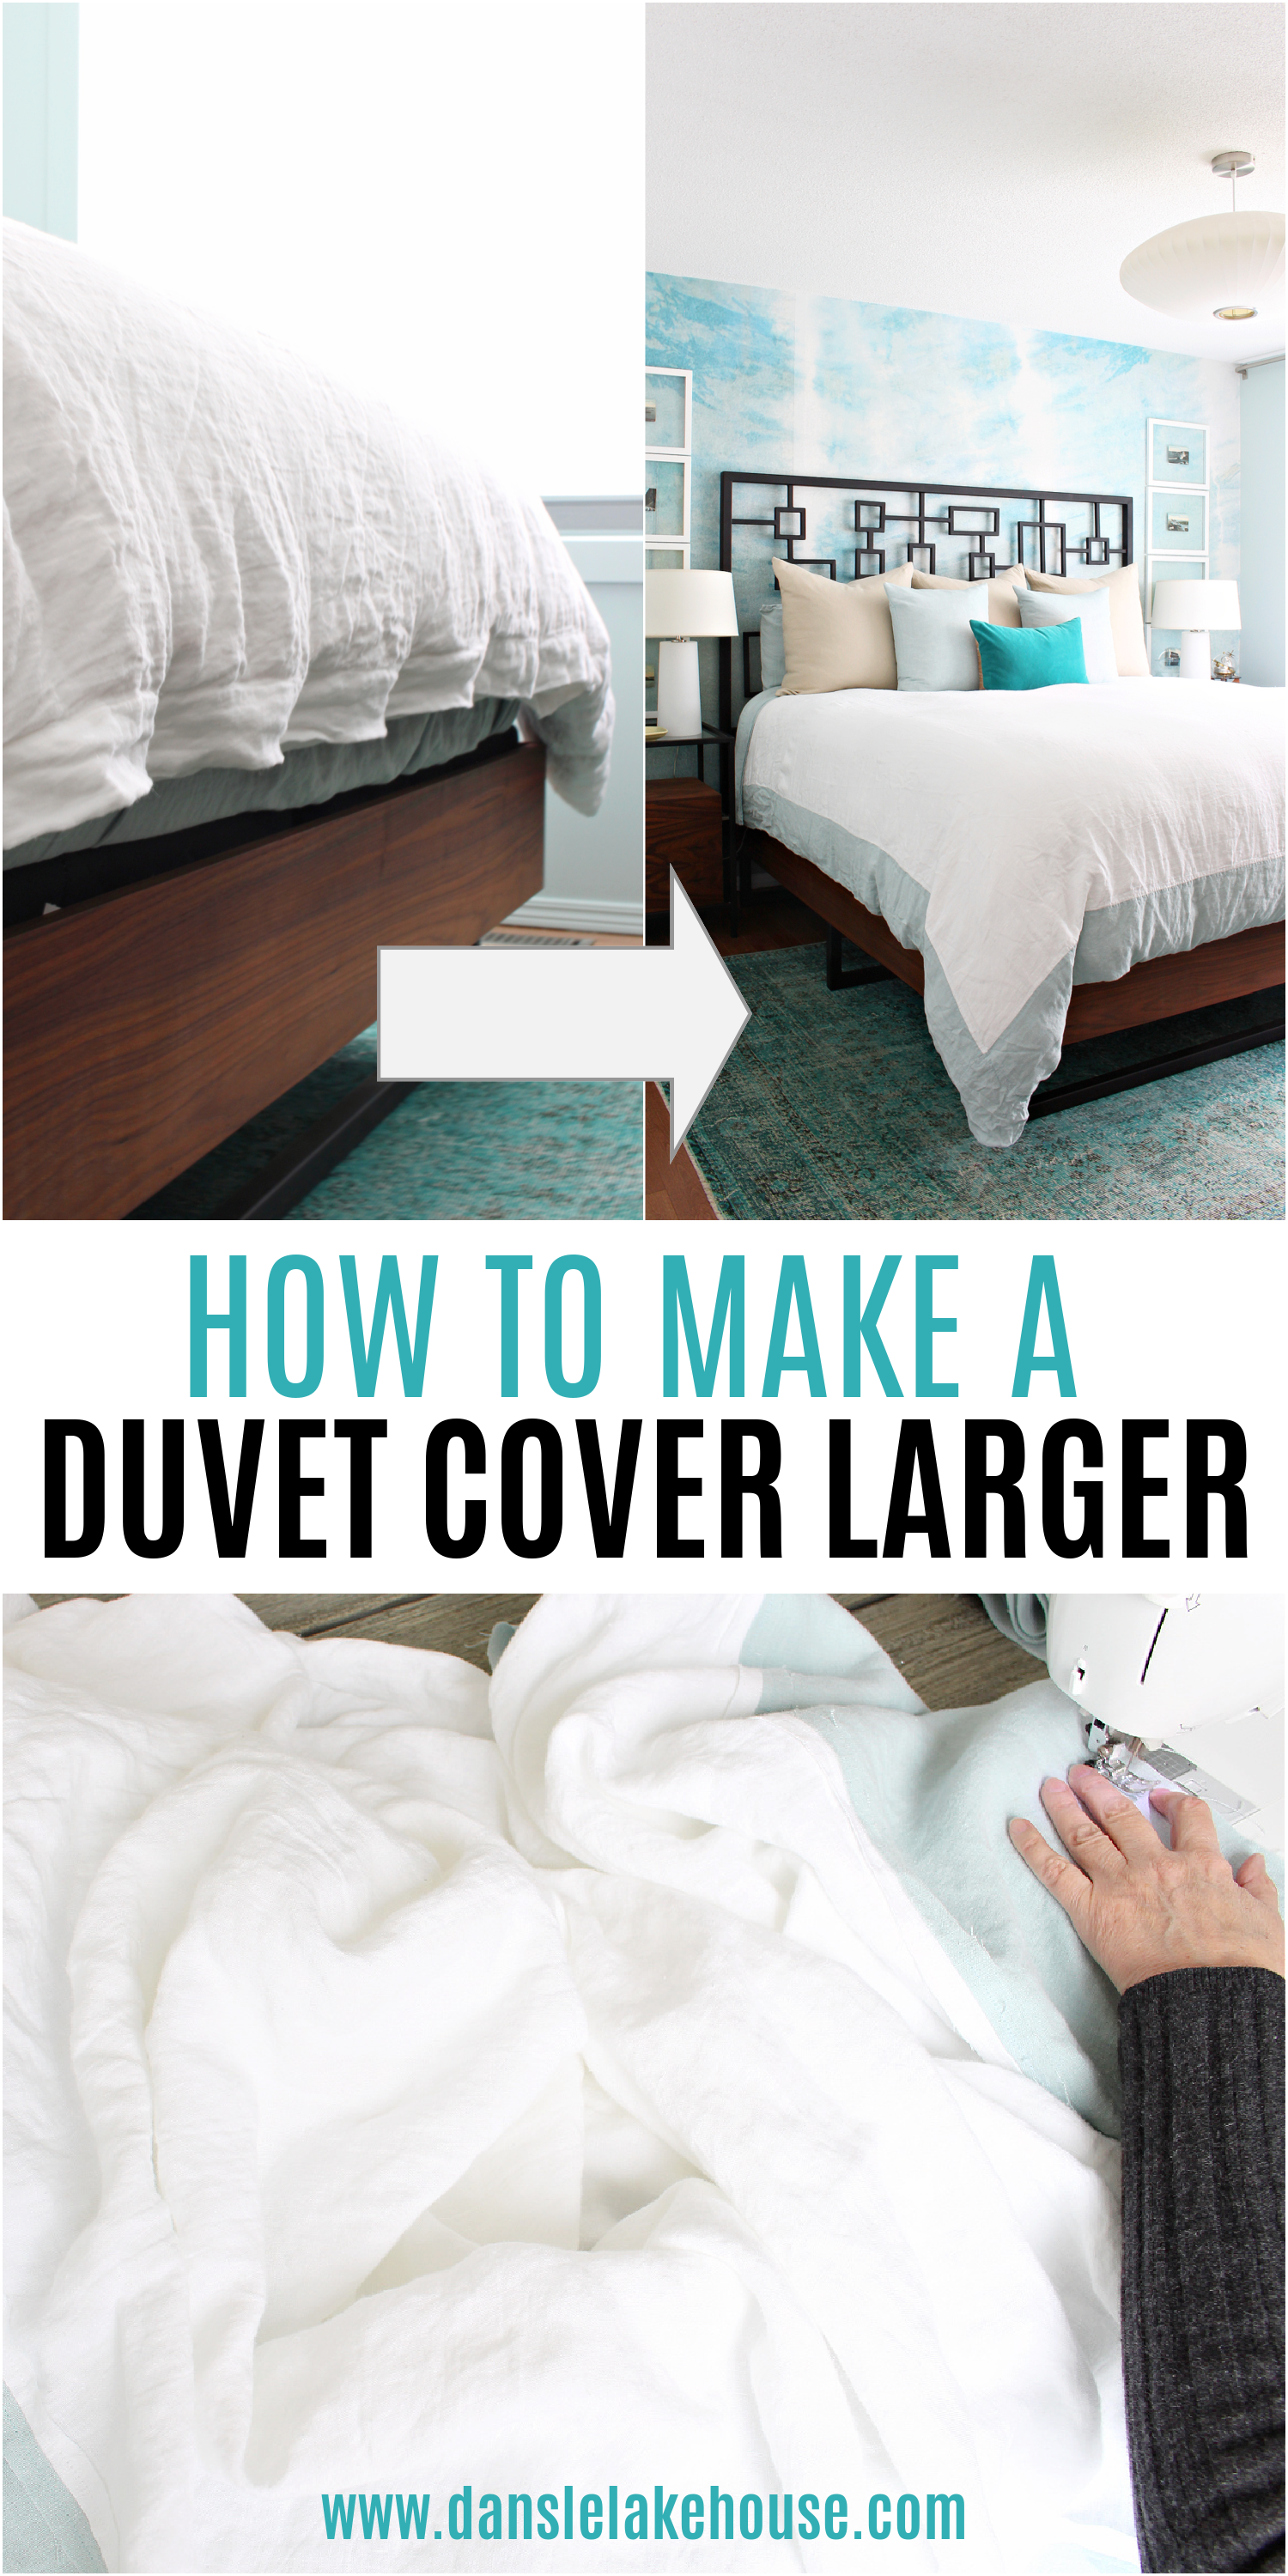 How to Make a Duvet Cover Larger